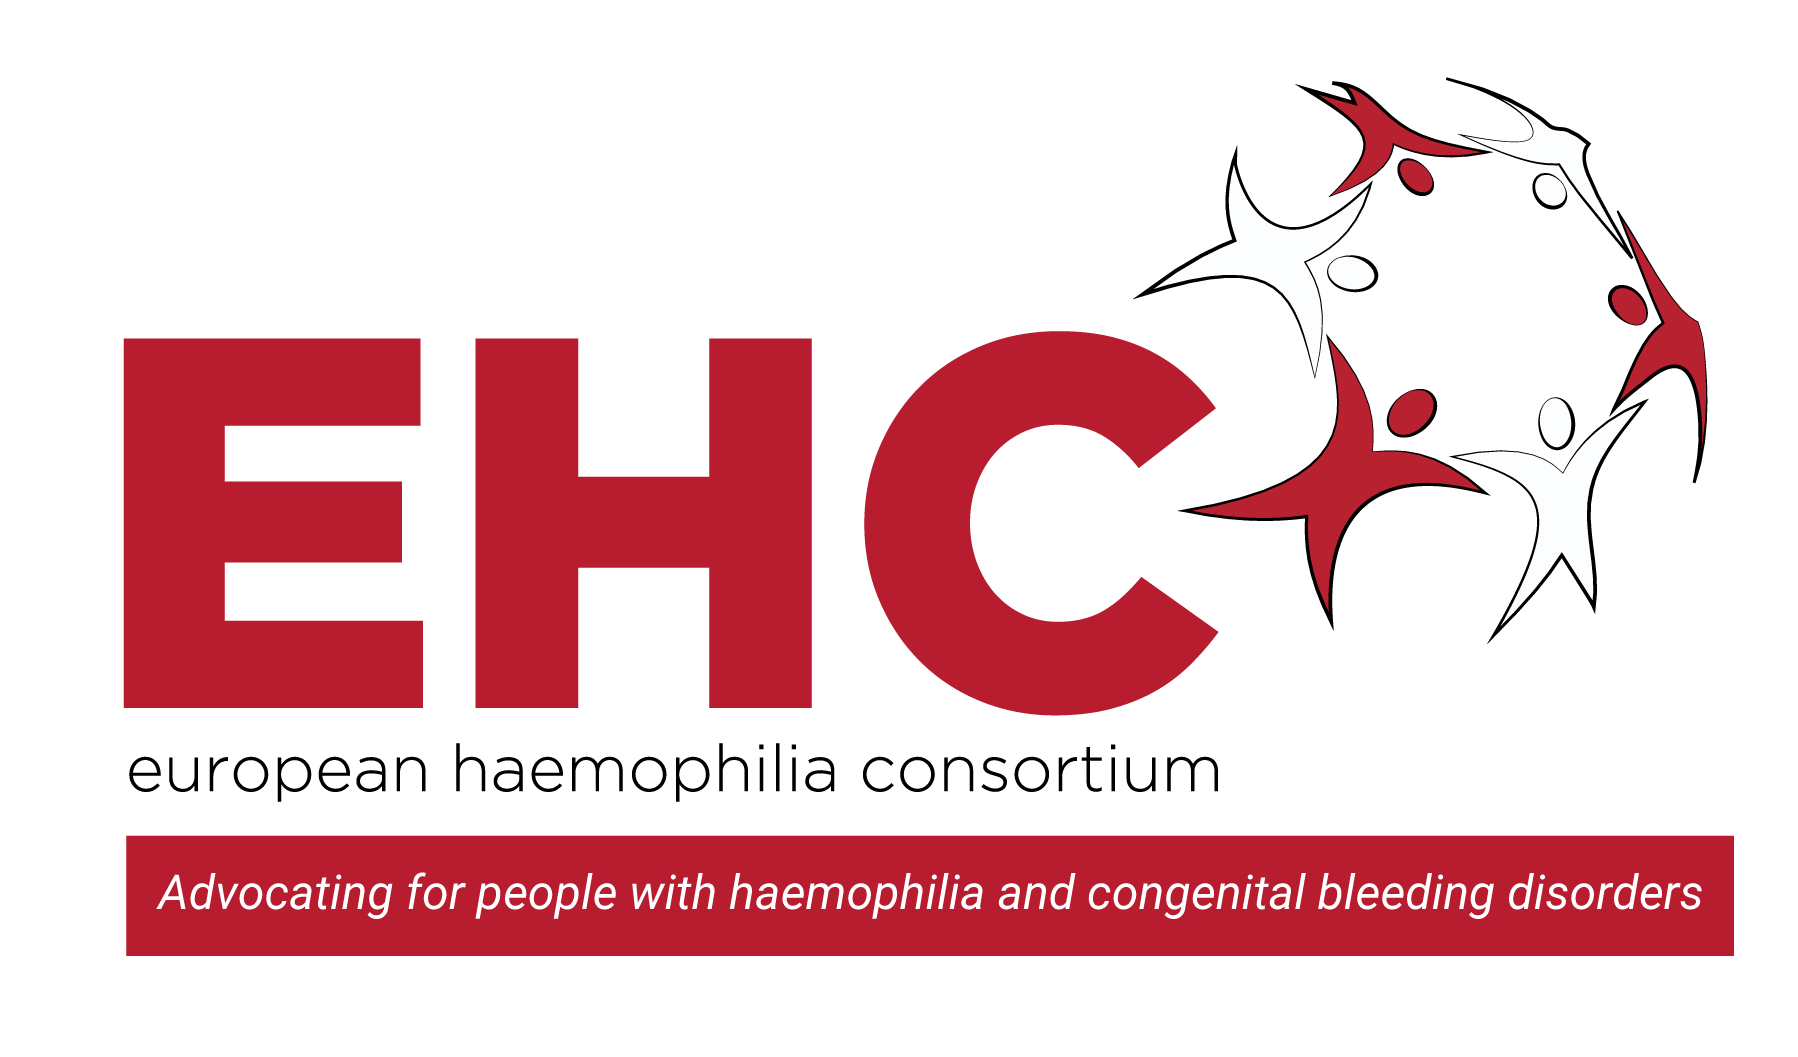 EHC – European Haemophilia Consortium - Advocating for people with haemophilia and congenital bleeding disorders - /inhibitors-in-their-entirety-presenting-the-european-network-on-inhibitor-research-group/